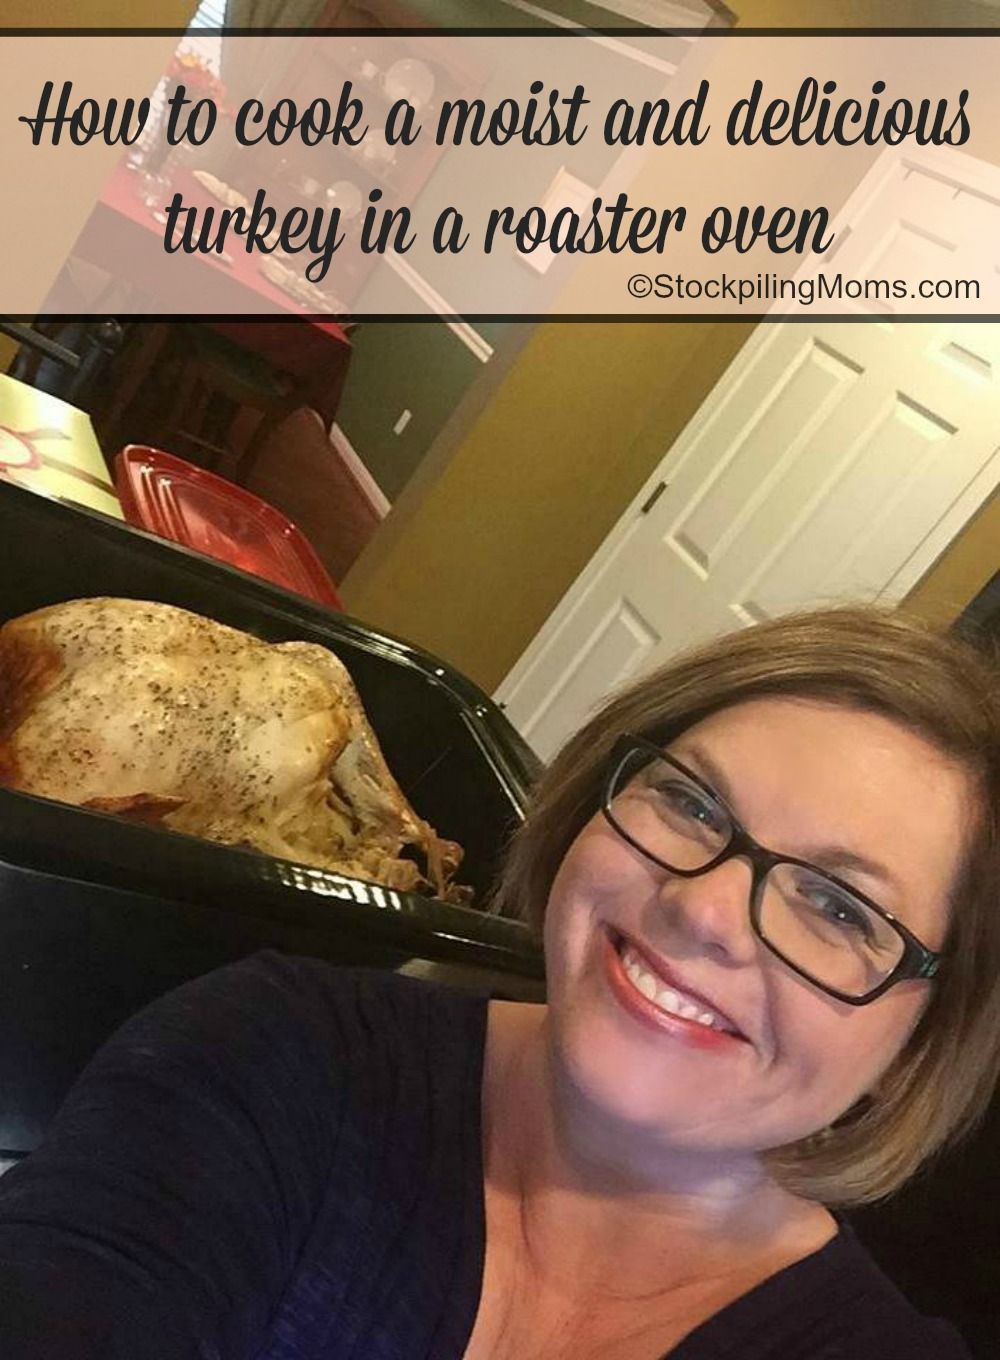 How to cook a moist and delicious turkey in a roaster oven -   25 turkey recipes in roaster
 ideas